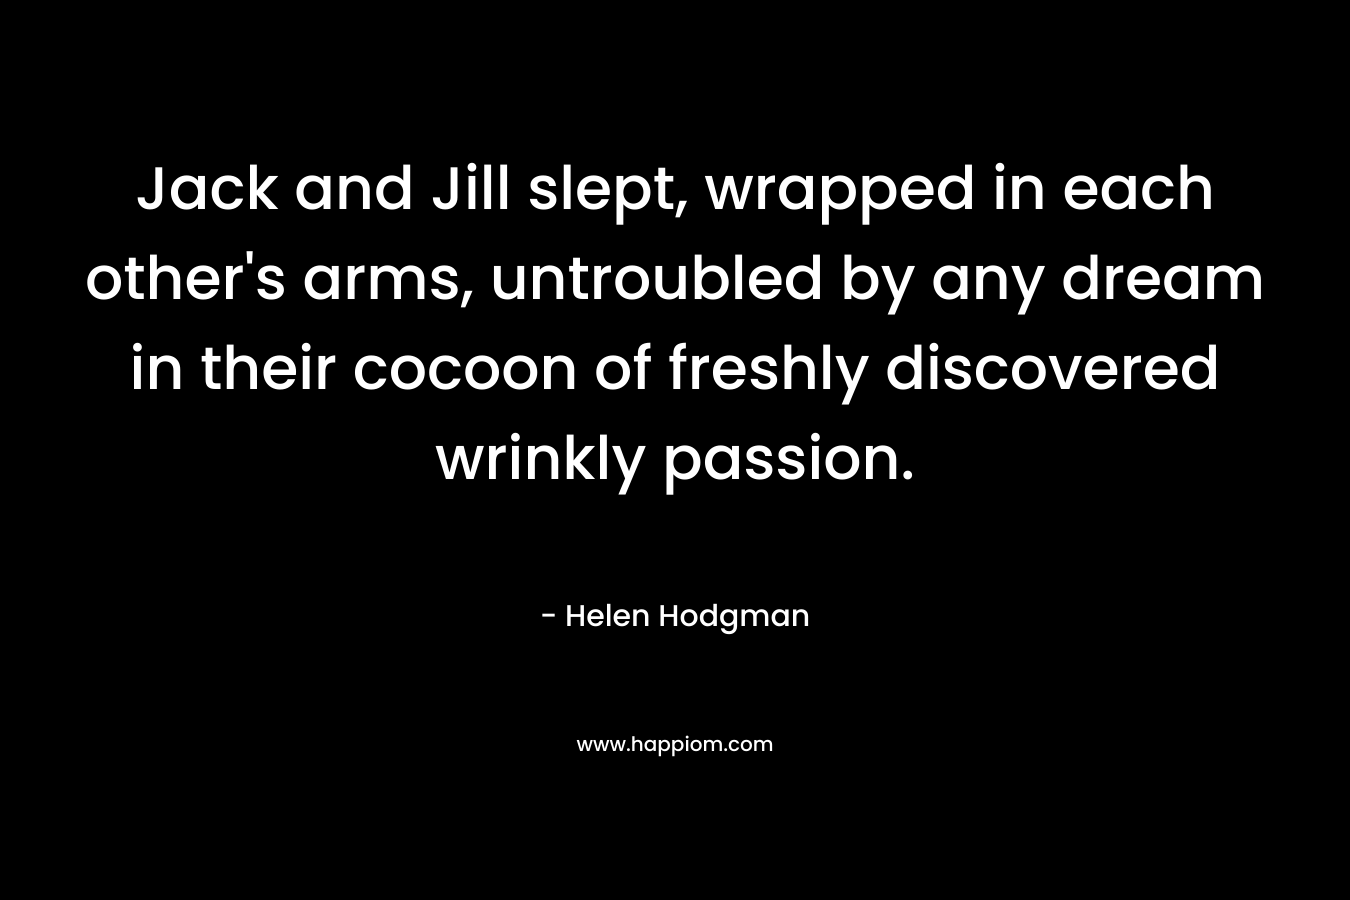 Jack and Jill slept, wrapped in each other’s arms, untroubled by any dream in their cocoon of freshly discovered wrinkly passion. – Helen Hodgman